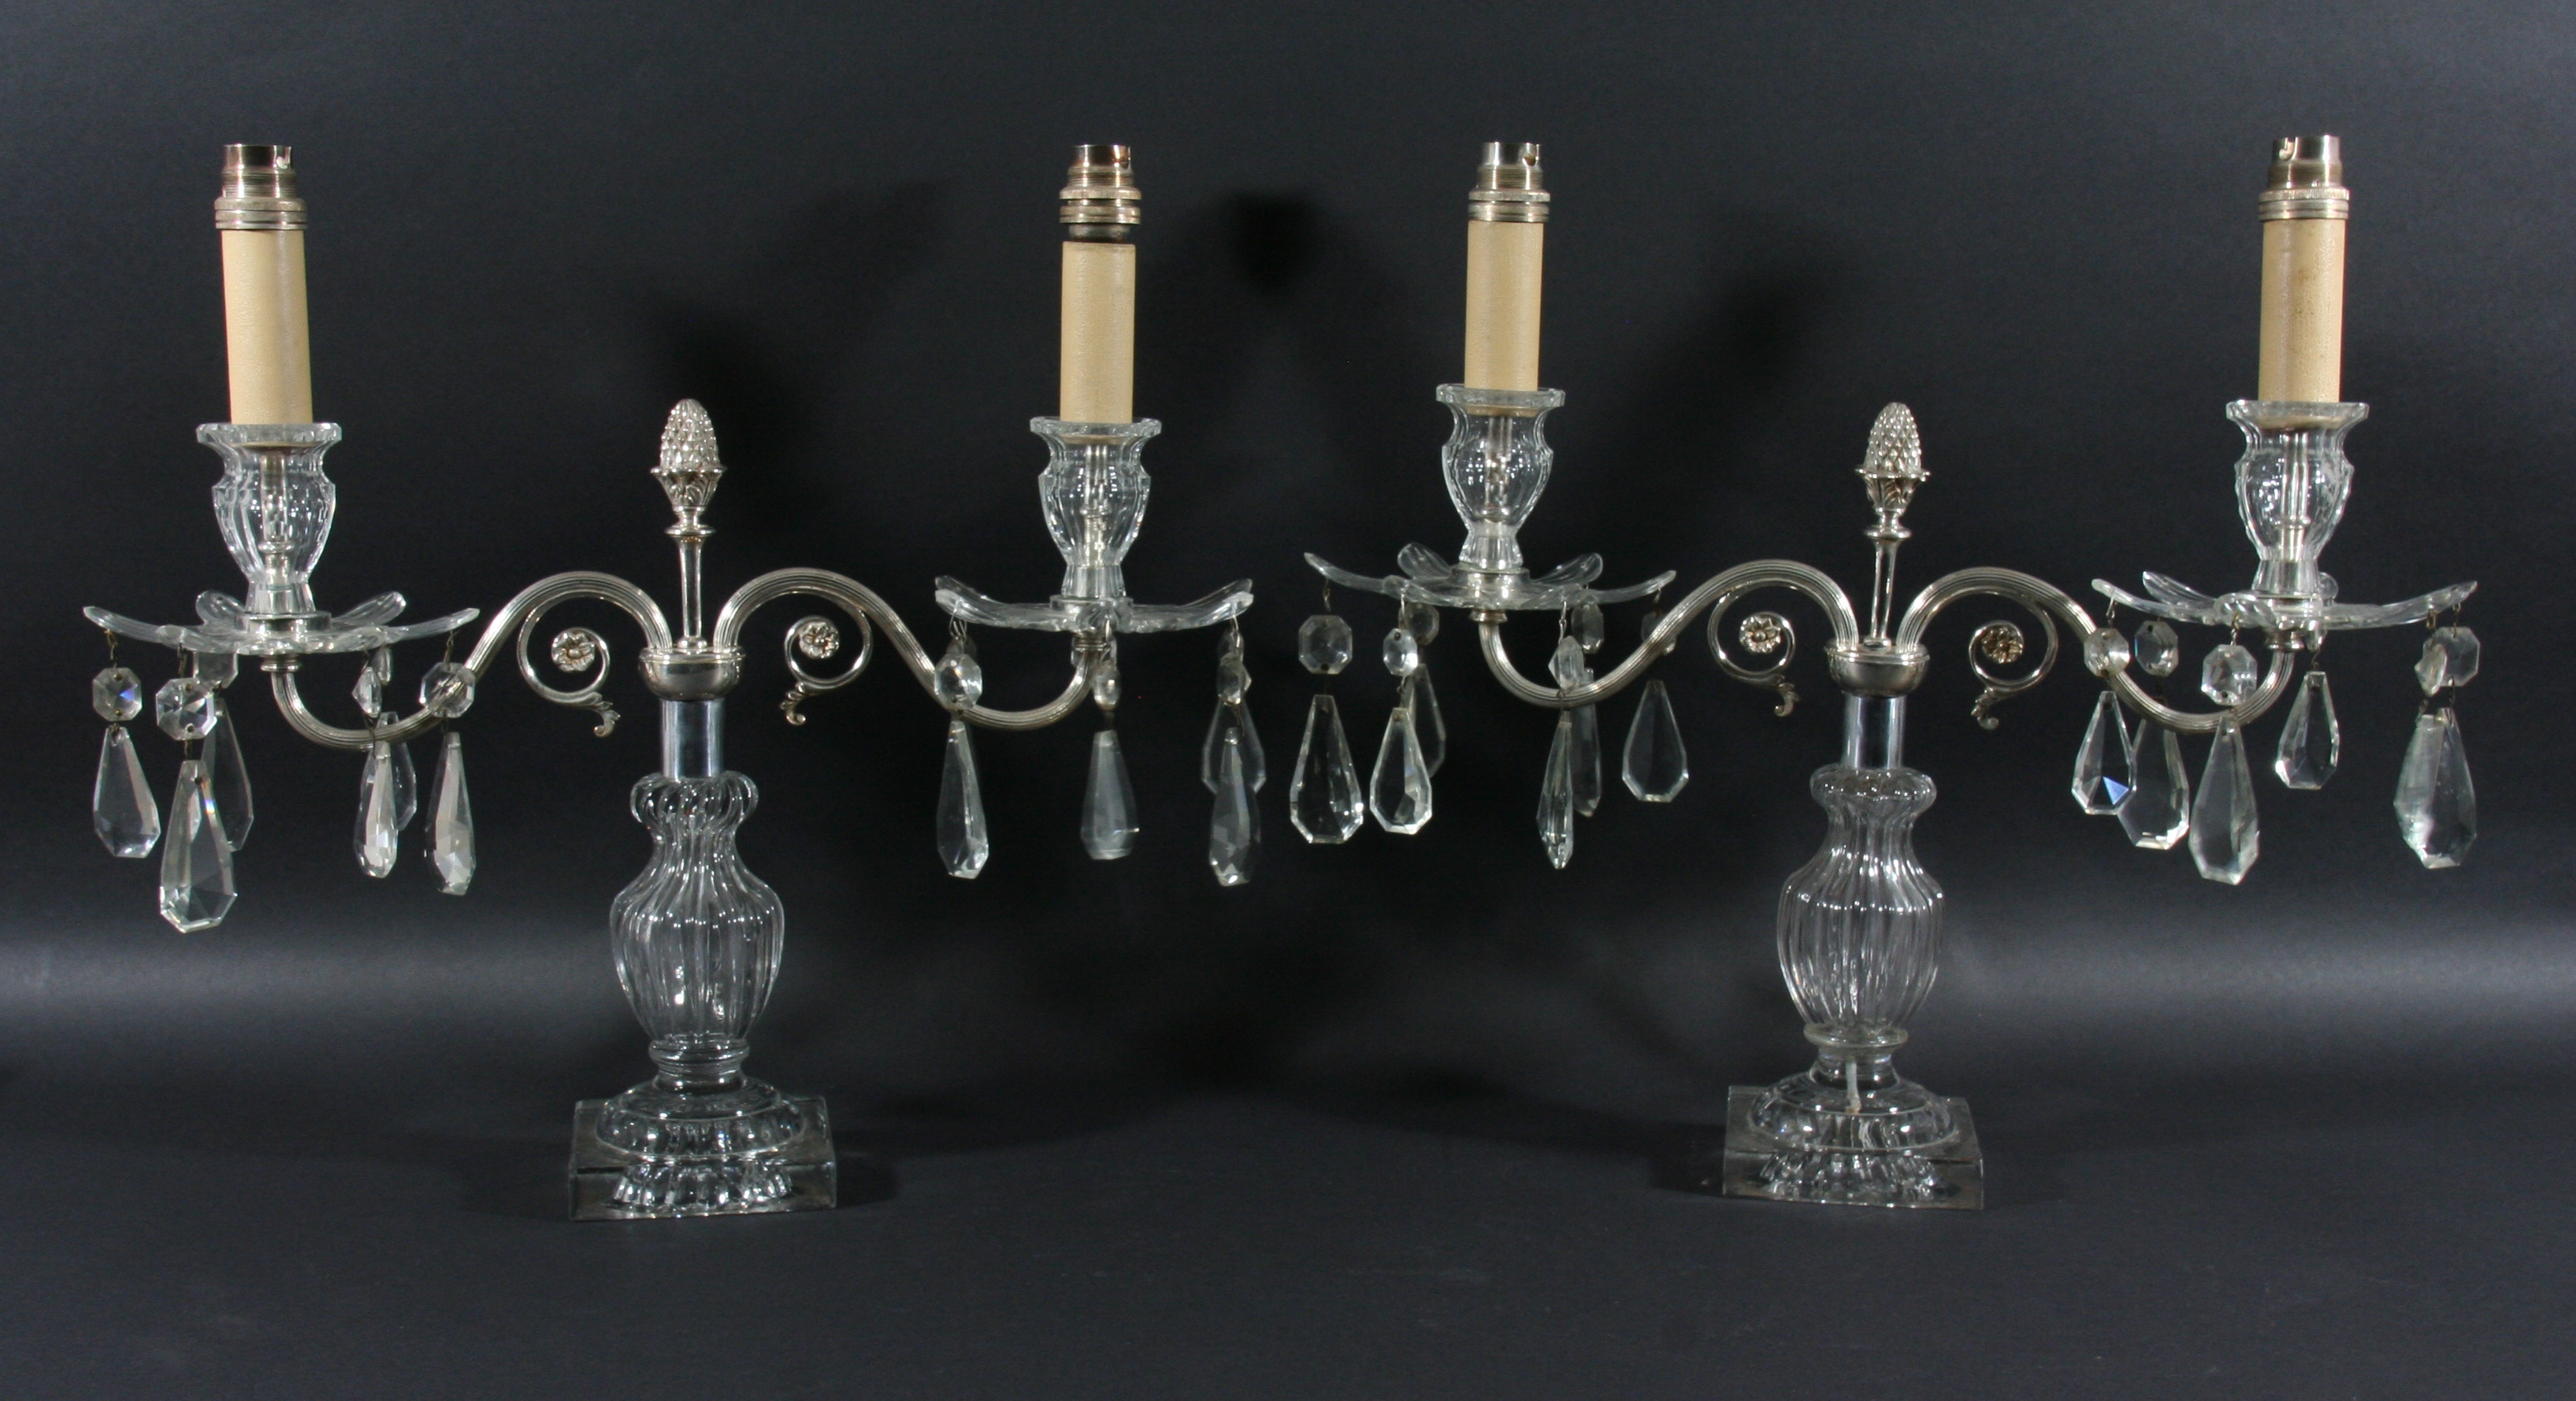 PAIR OF TWO LIGHT GLASS CANDELABRA the silver plated arms supporting floral drip trays, on reeded